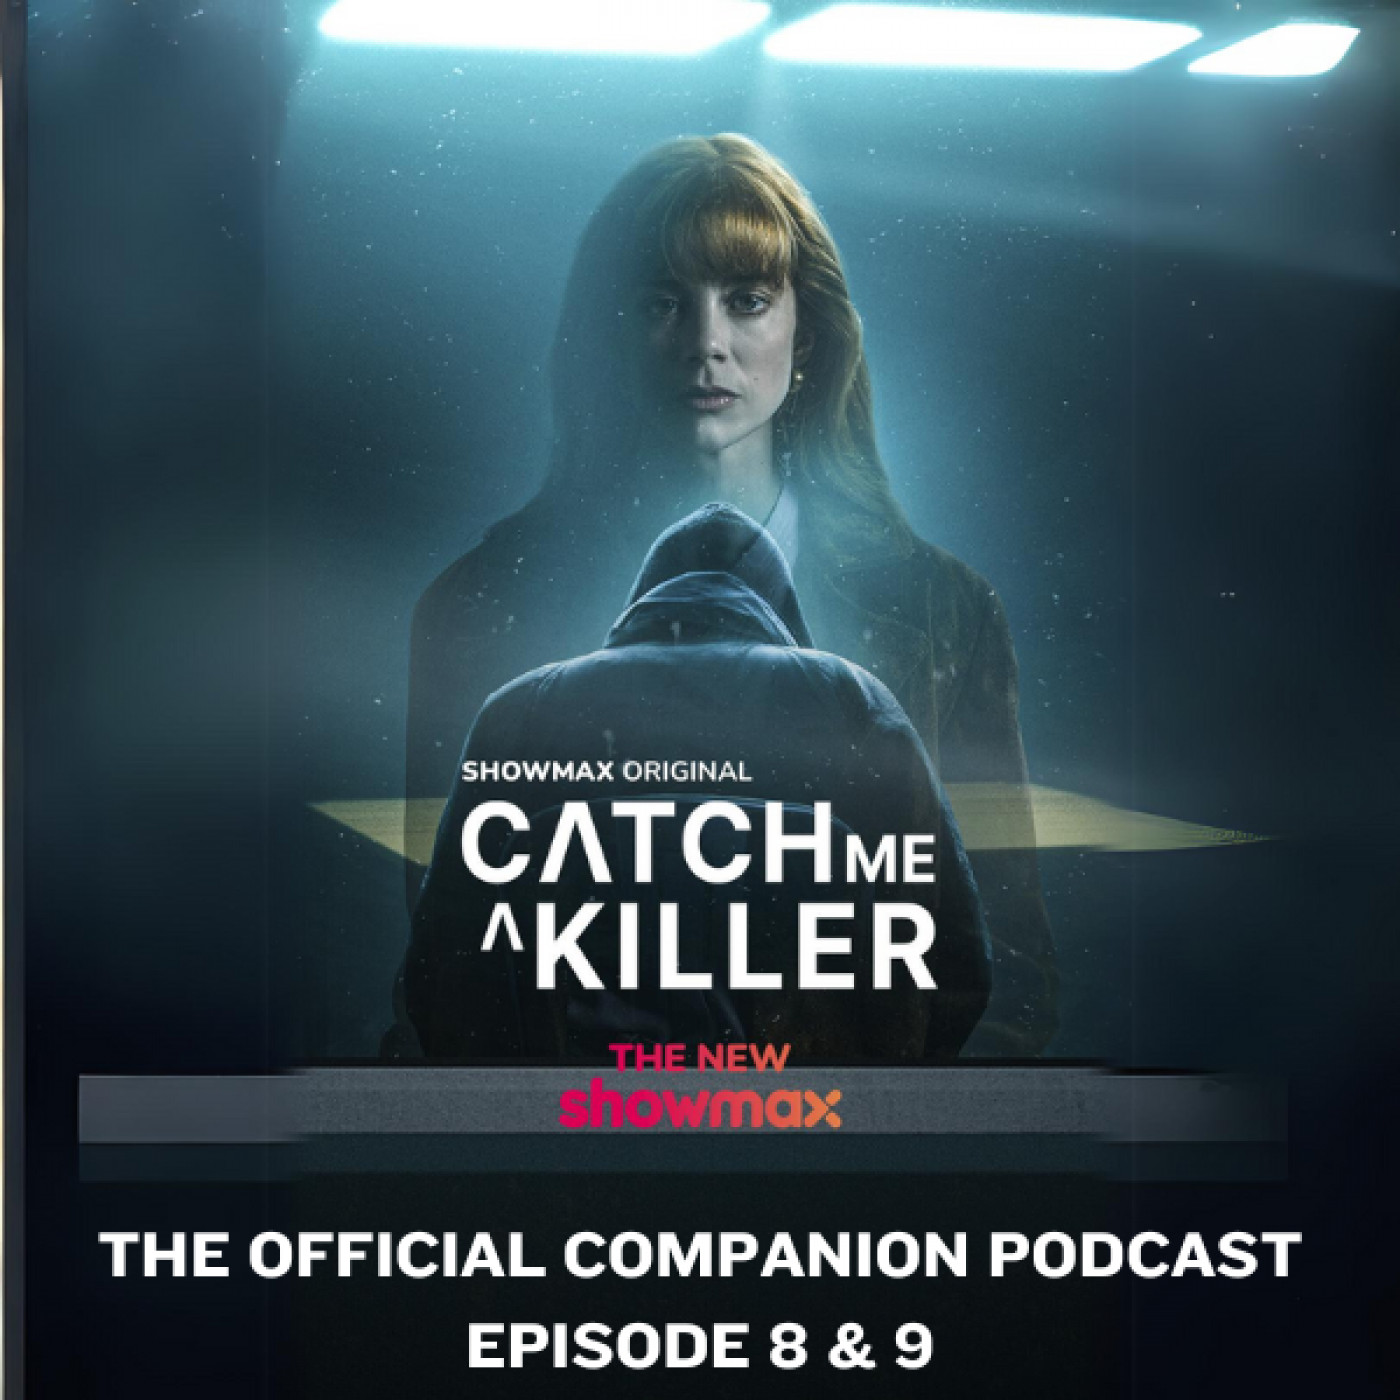 Catch Me A Killer: Official Companion Podcast Brought to you by Showmax (Episode 8 & 9)